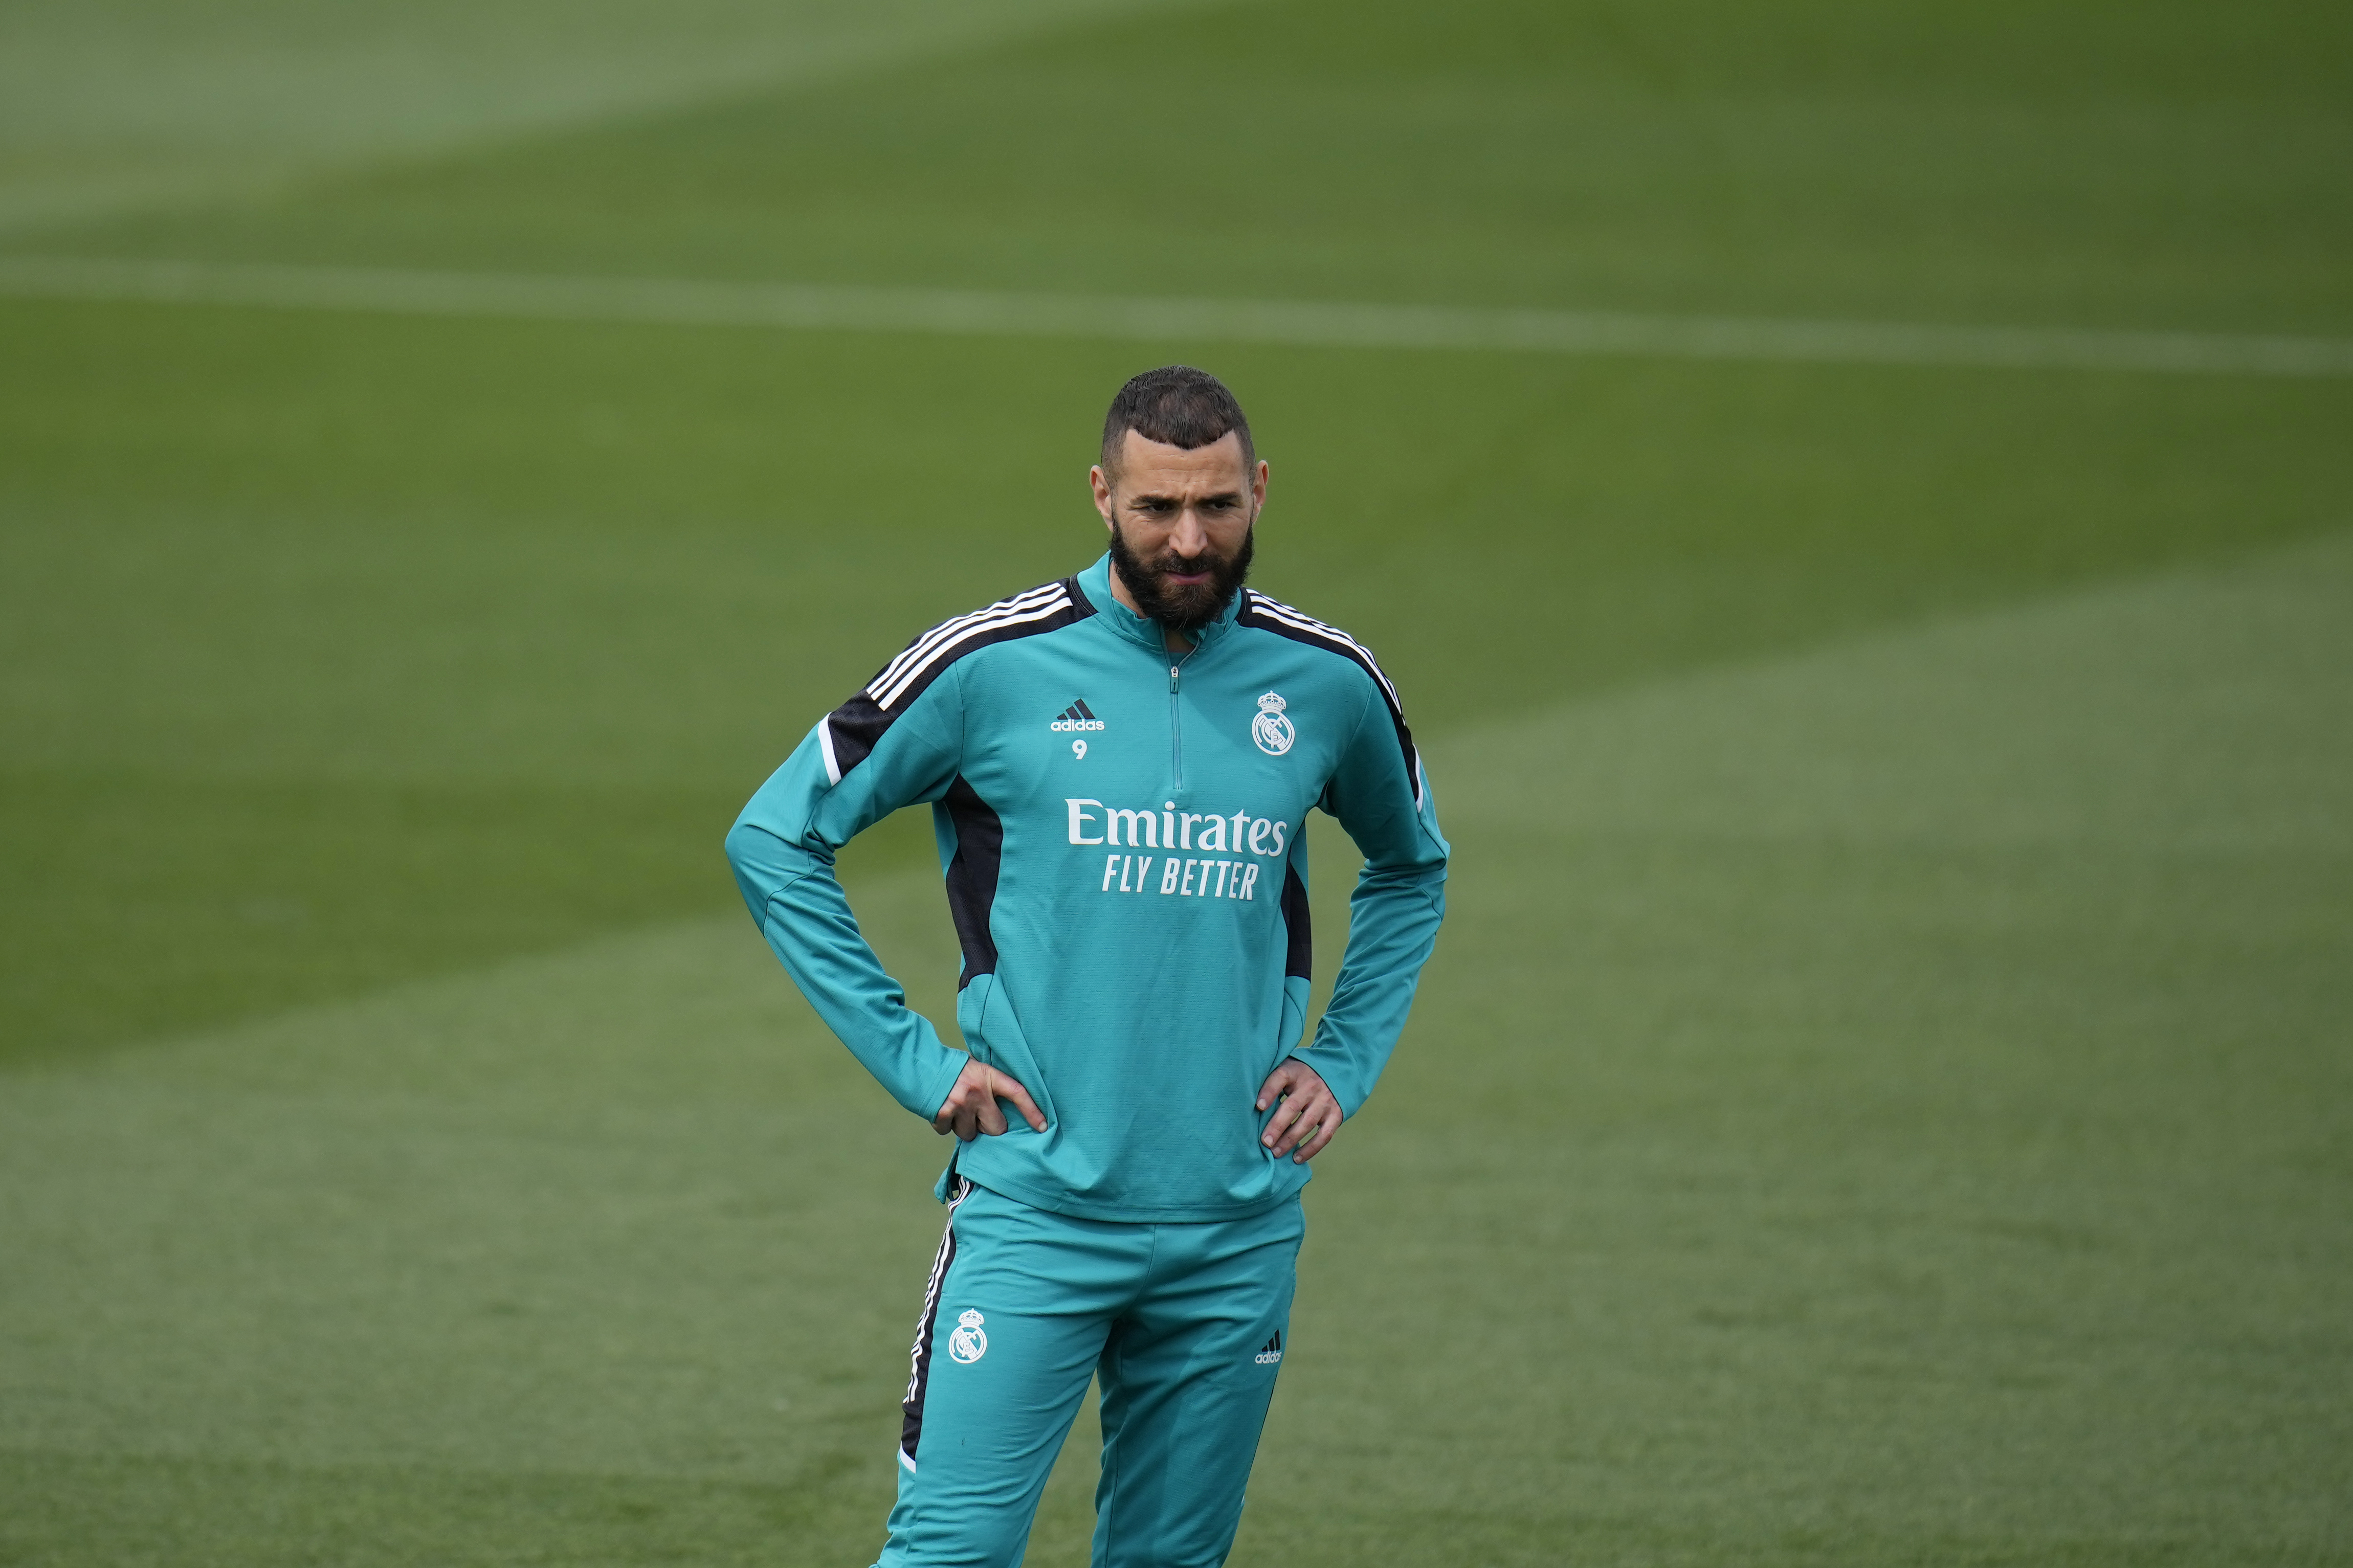 Benzema Looks To Cap Great Season With 5th European Title